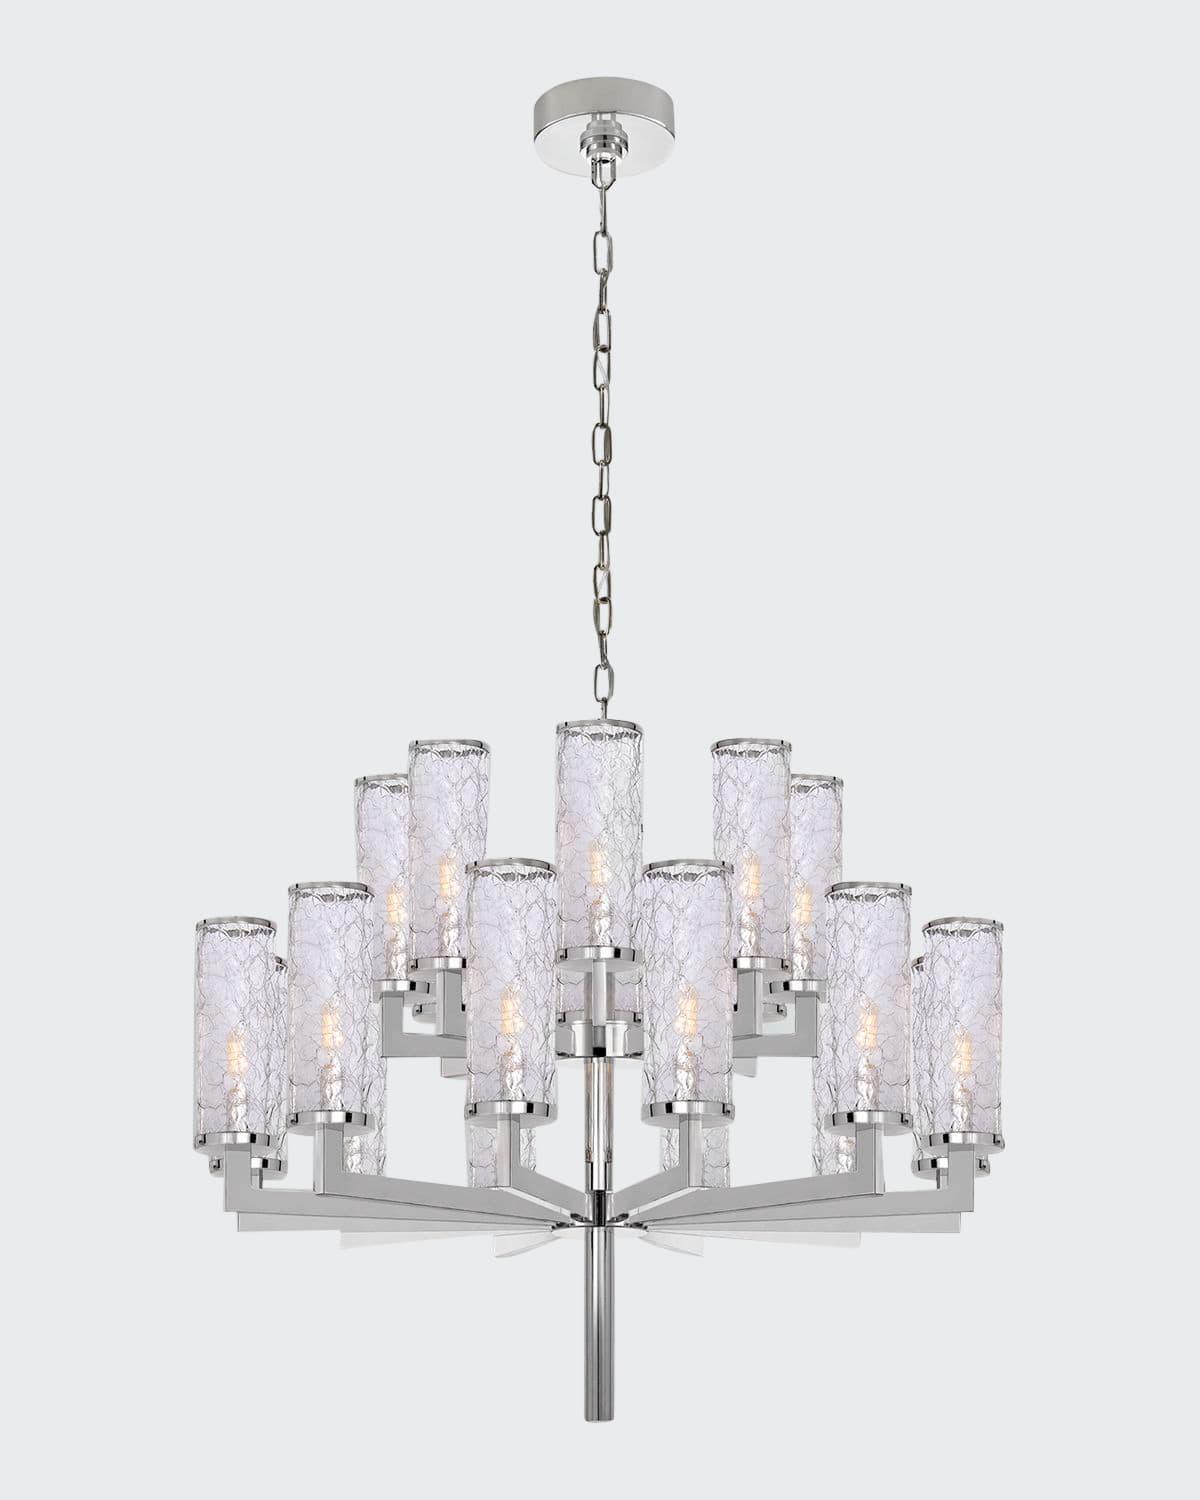 Kelly Wearstler For Visual Comfort Signature Liaison Double Tier Chandelier In Polished Nickel